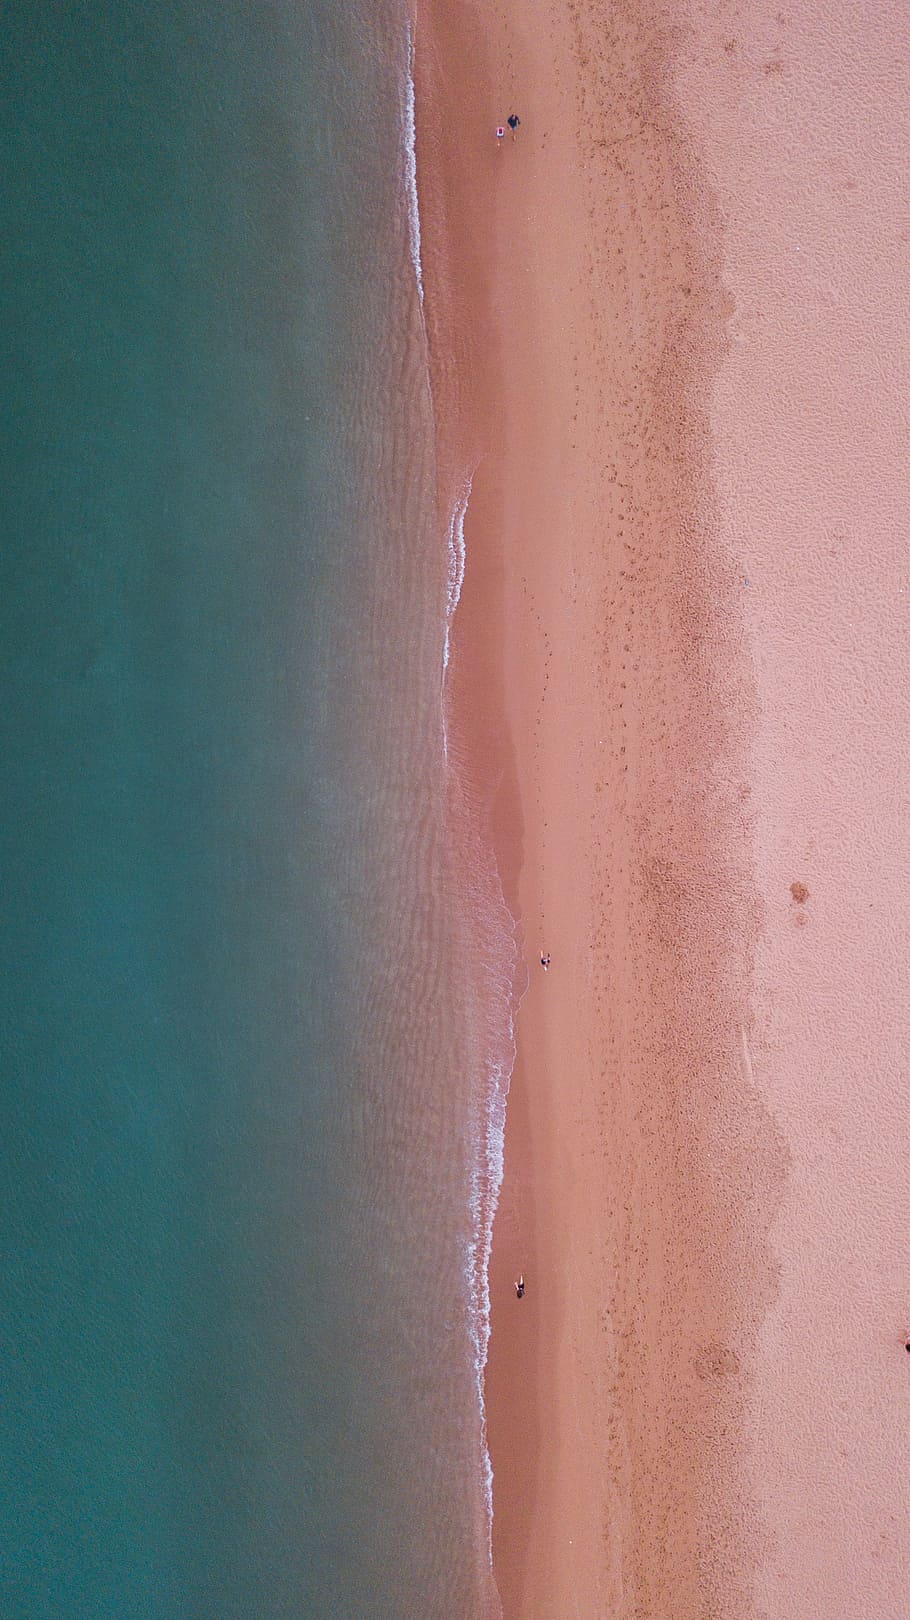 aerial photography of beach, areal photo of seashore and body of water